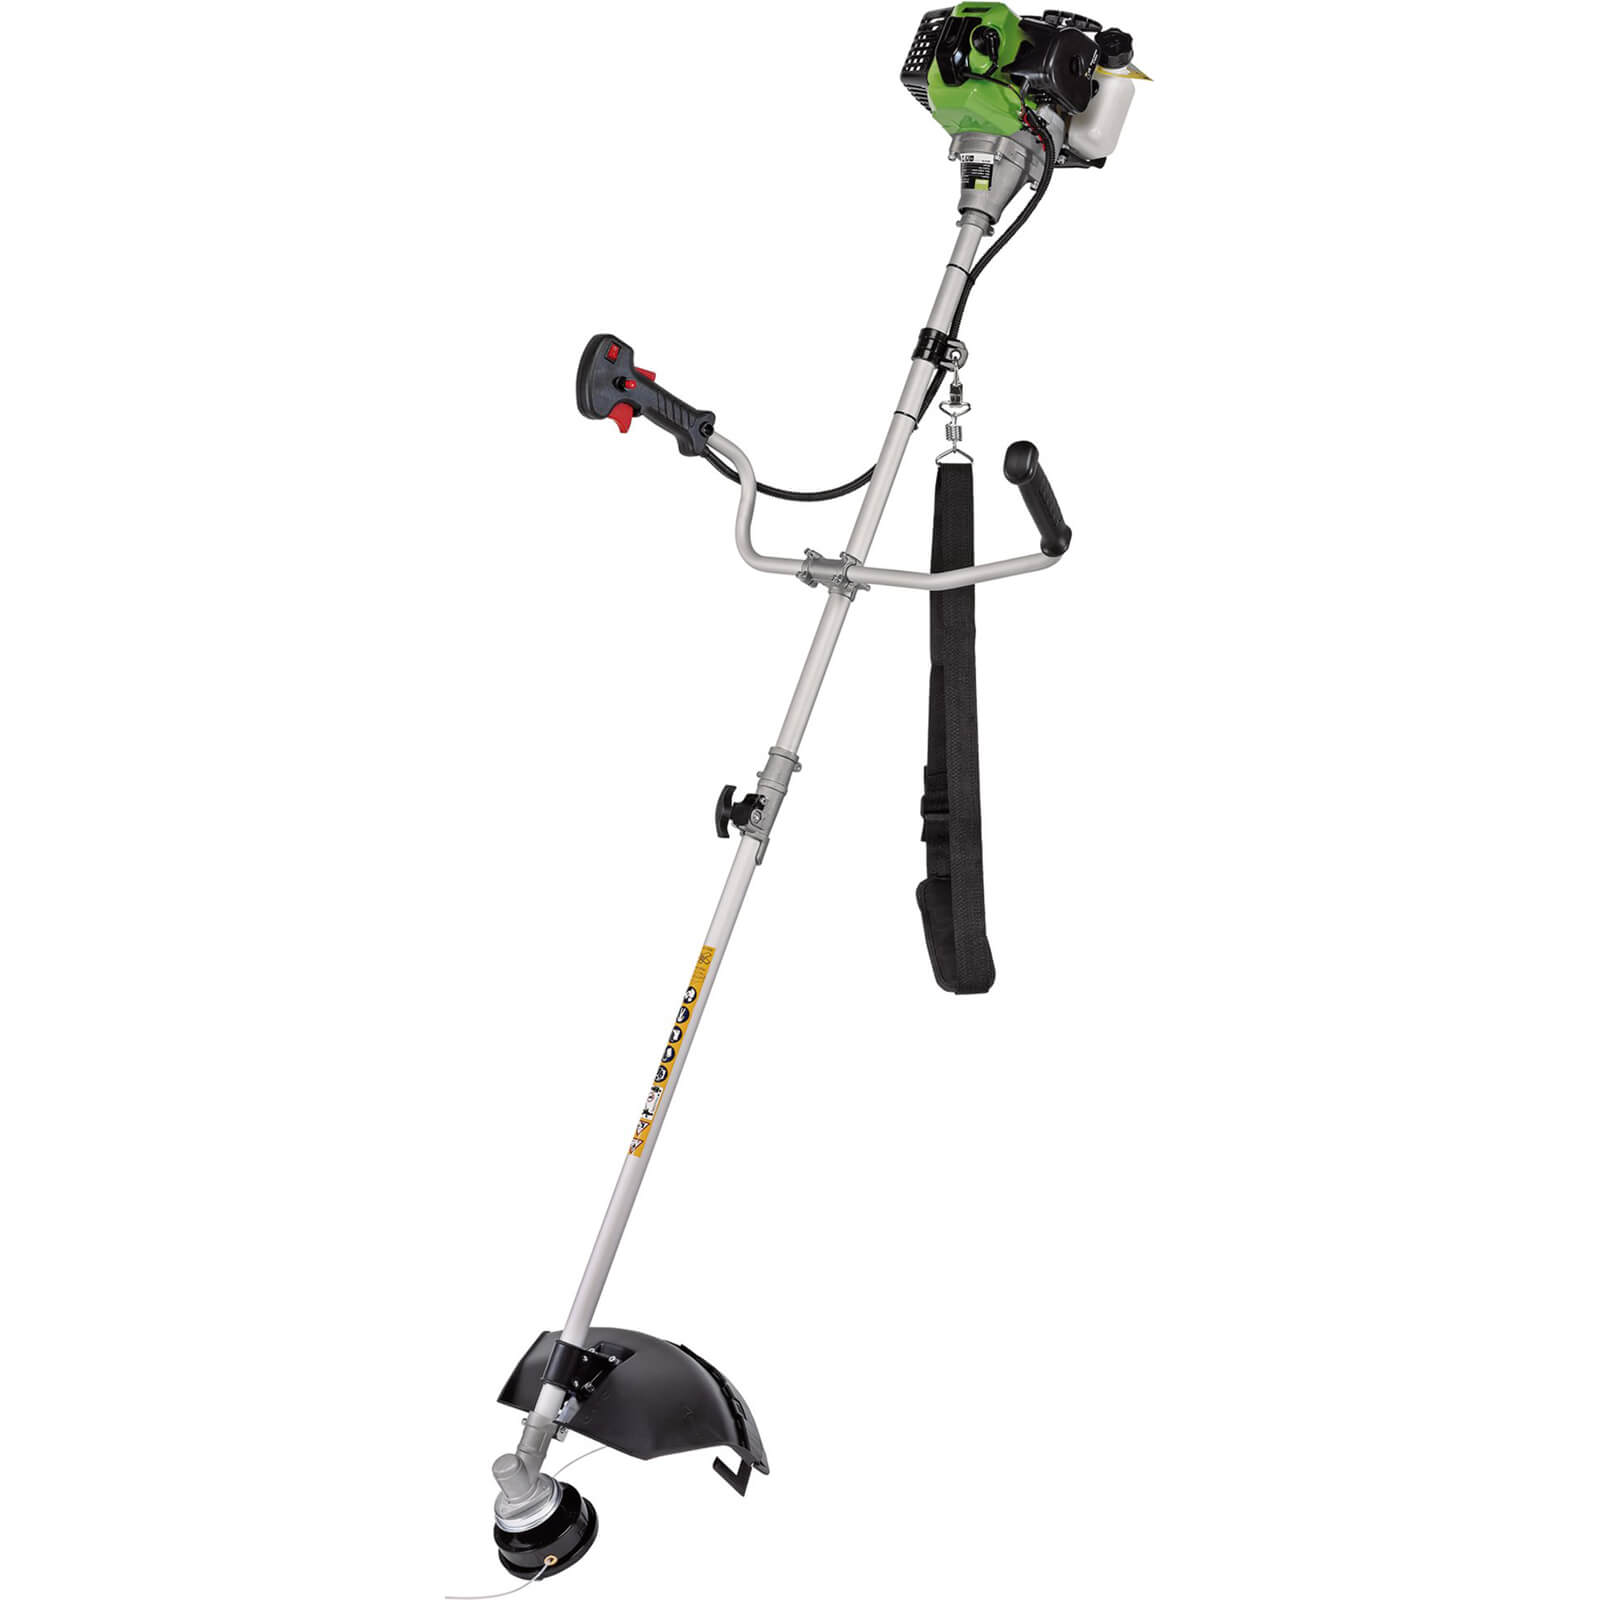 Photo of Draper Gtp34 Petrol Brush Cutter And Grass Trimmer